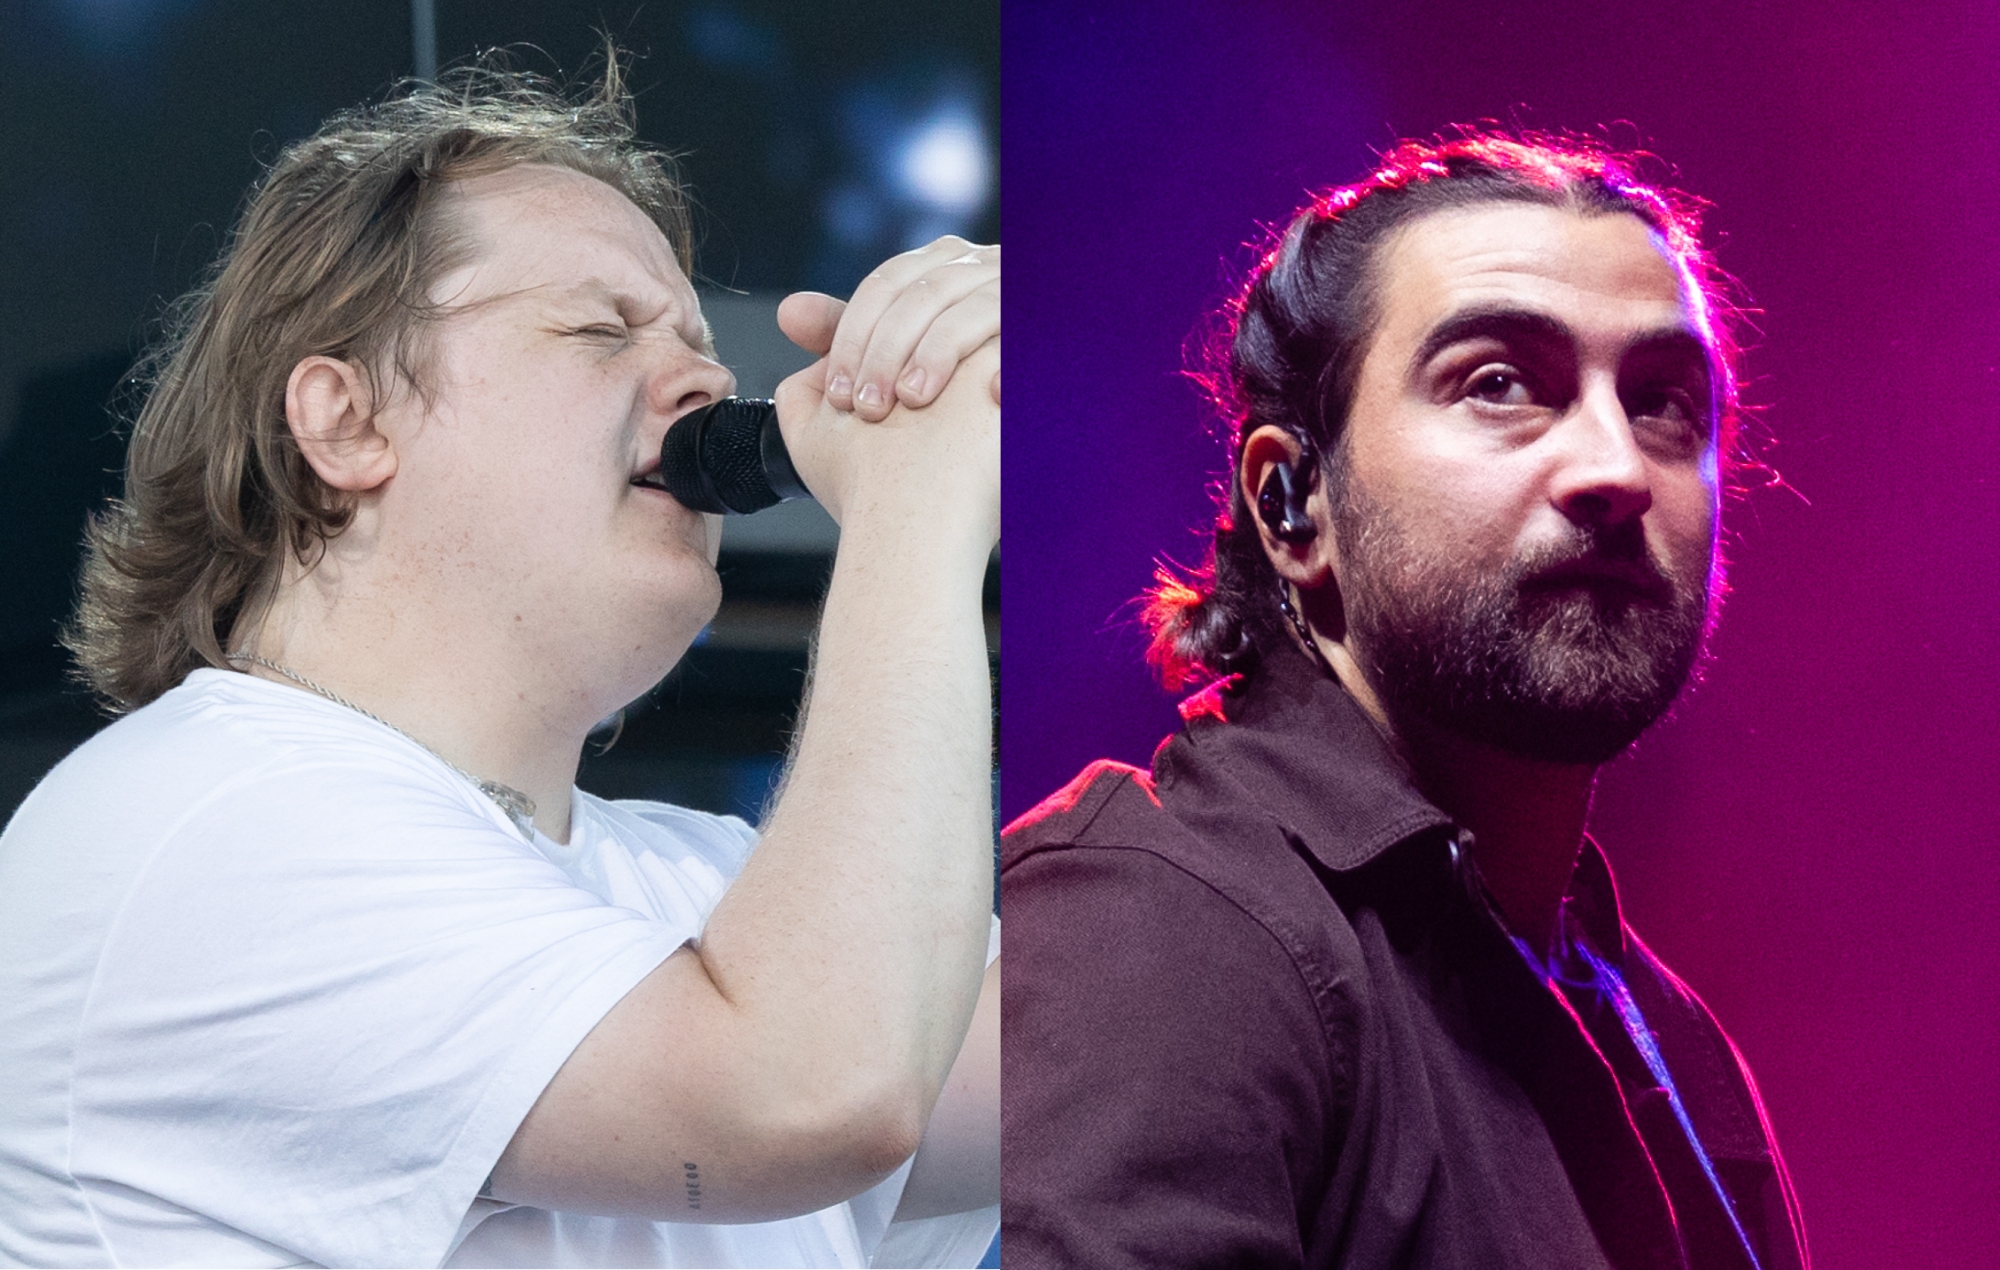 Lewis Capaldi and Noah Kahan (Photo by Anna Barclay/Getty Images and Samir Hussein/WireImage)